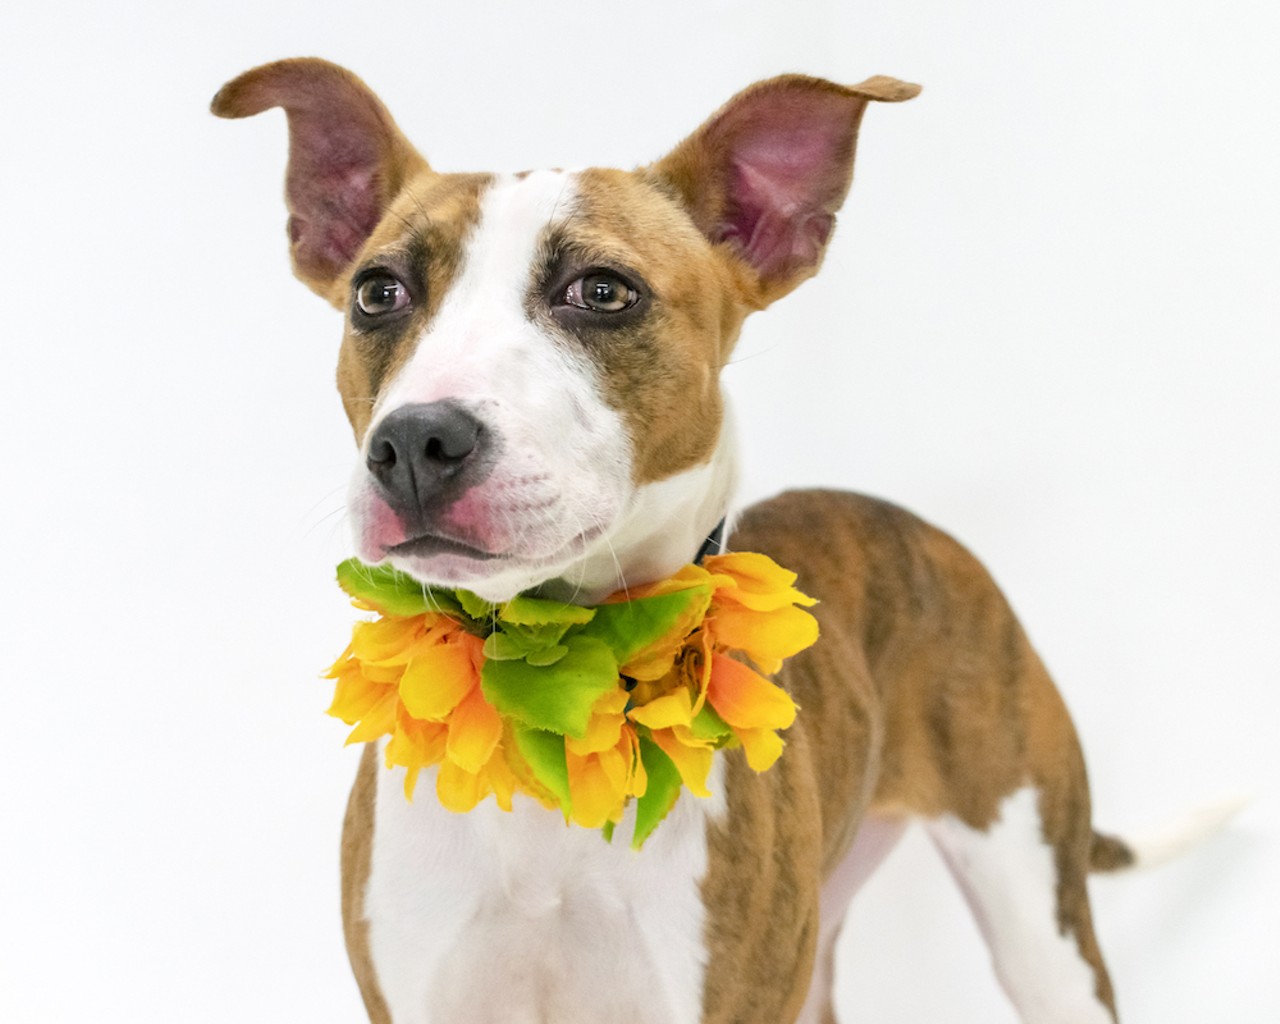 32 dapper dogs in Orange County, all dressed up to find forever homes